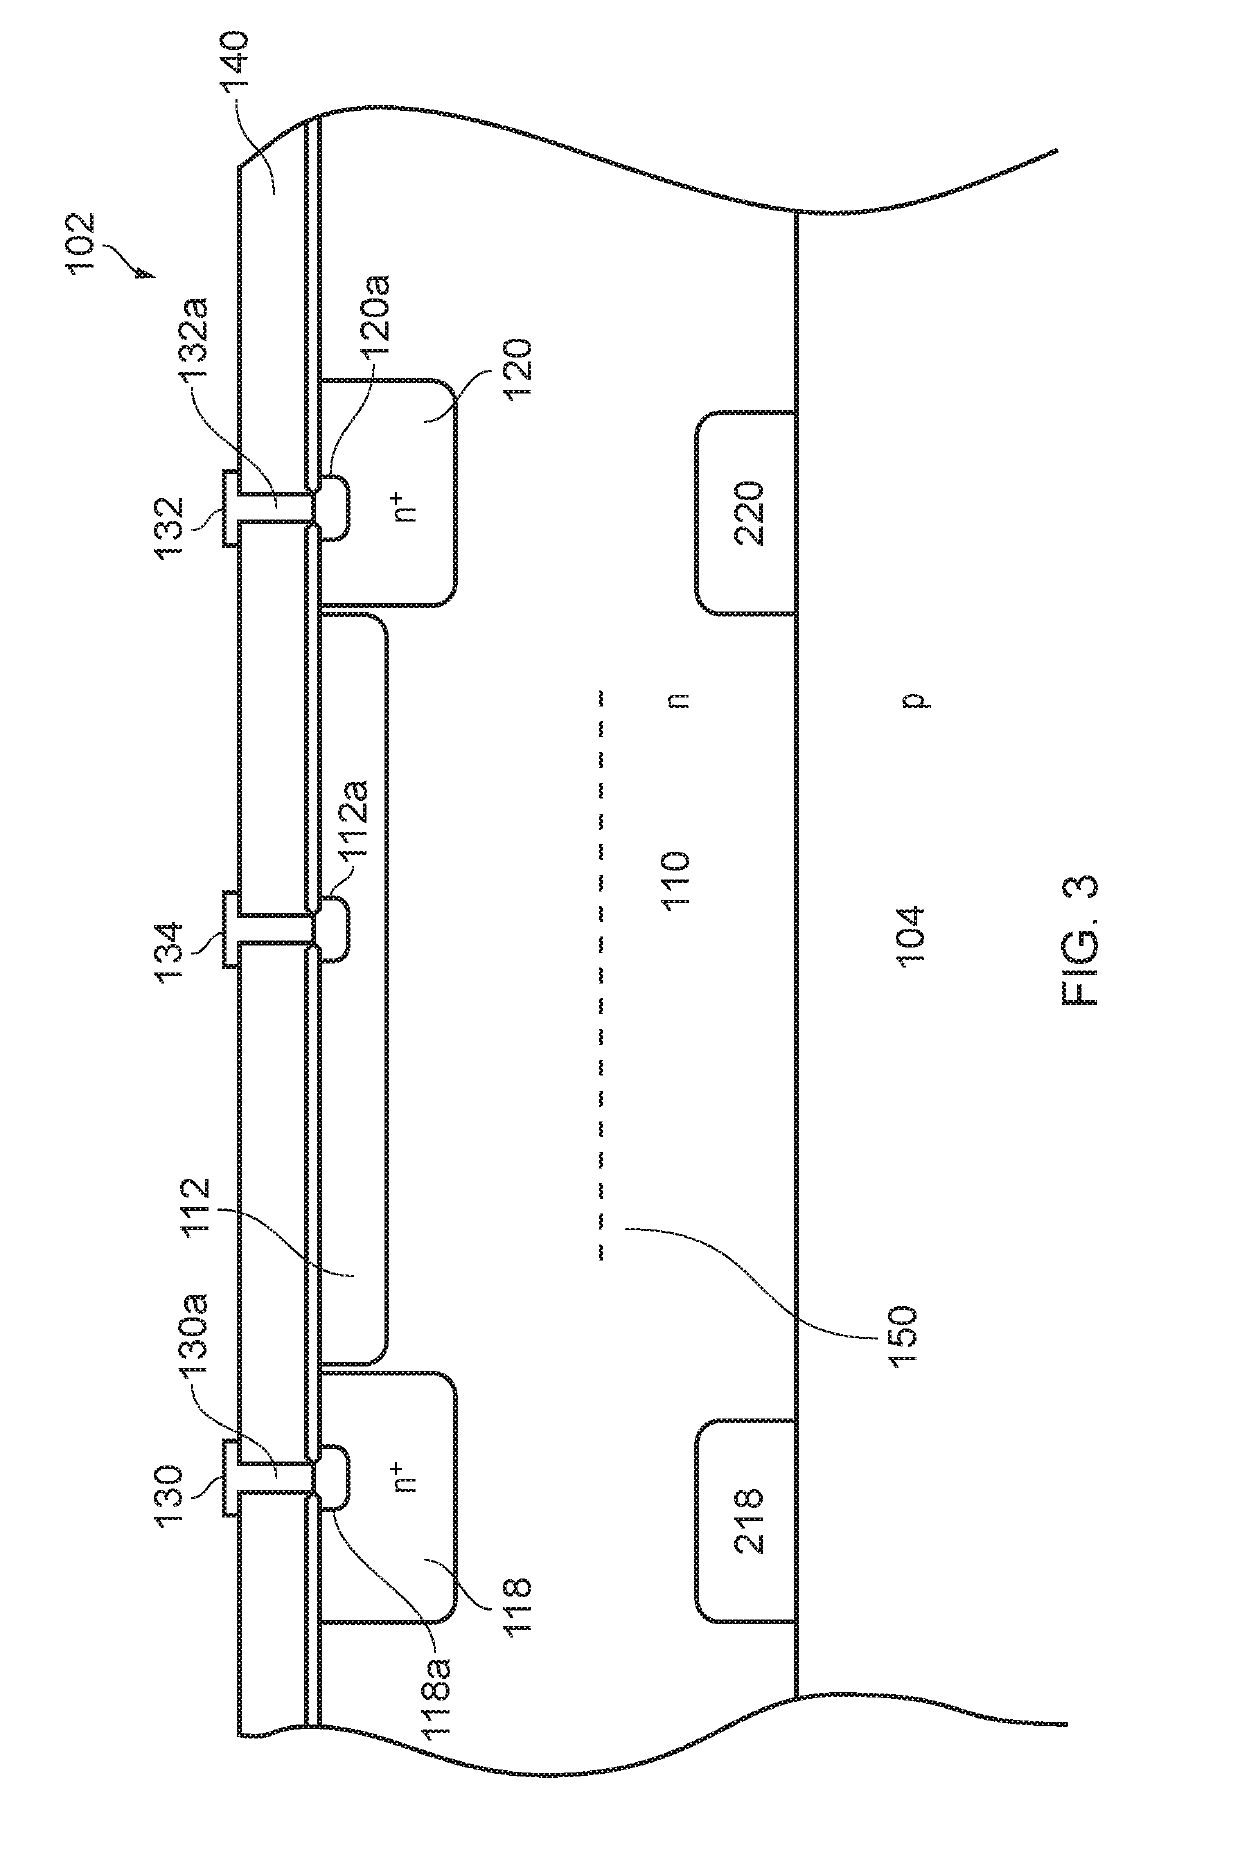 Low gate current junction field effect transistor device architecture